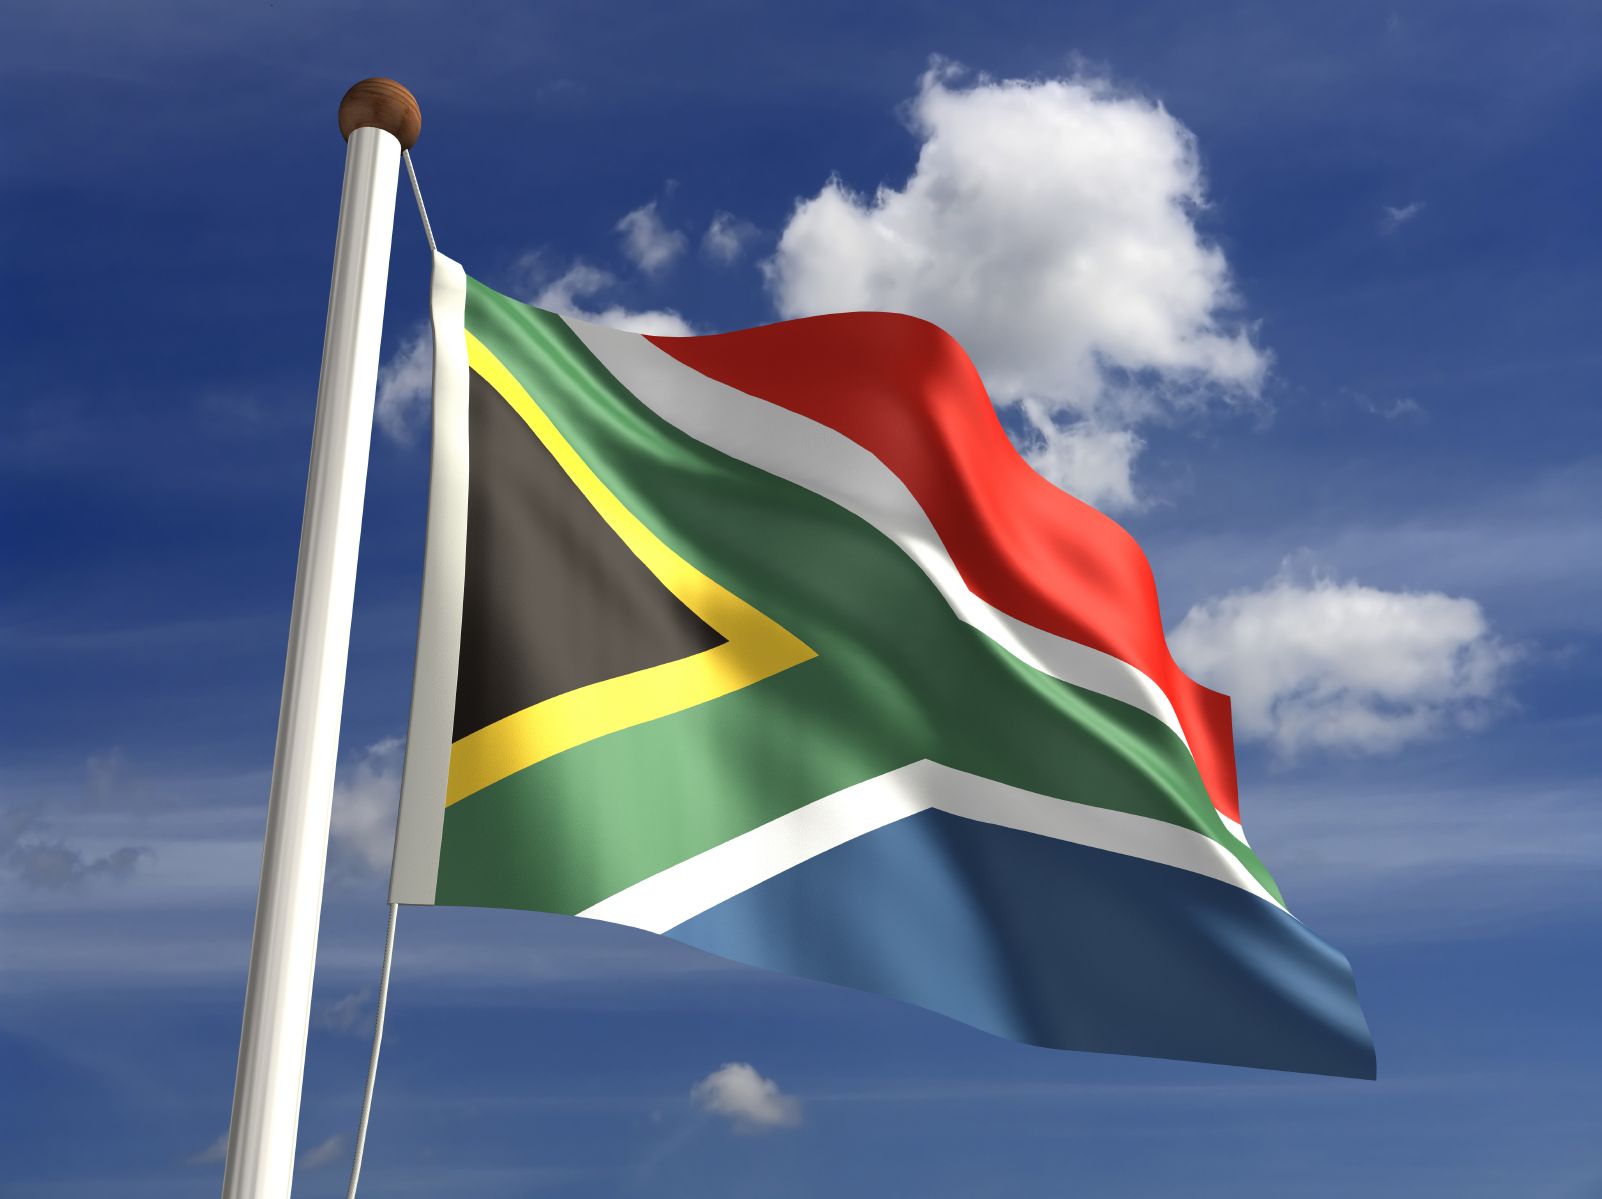 South Africa National Flag Wallpaper